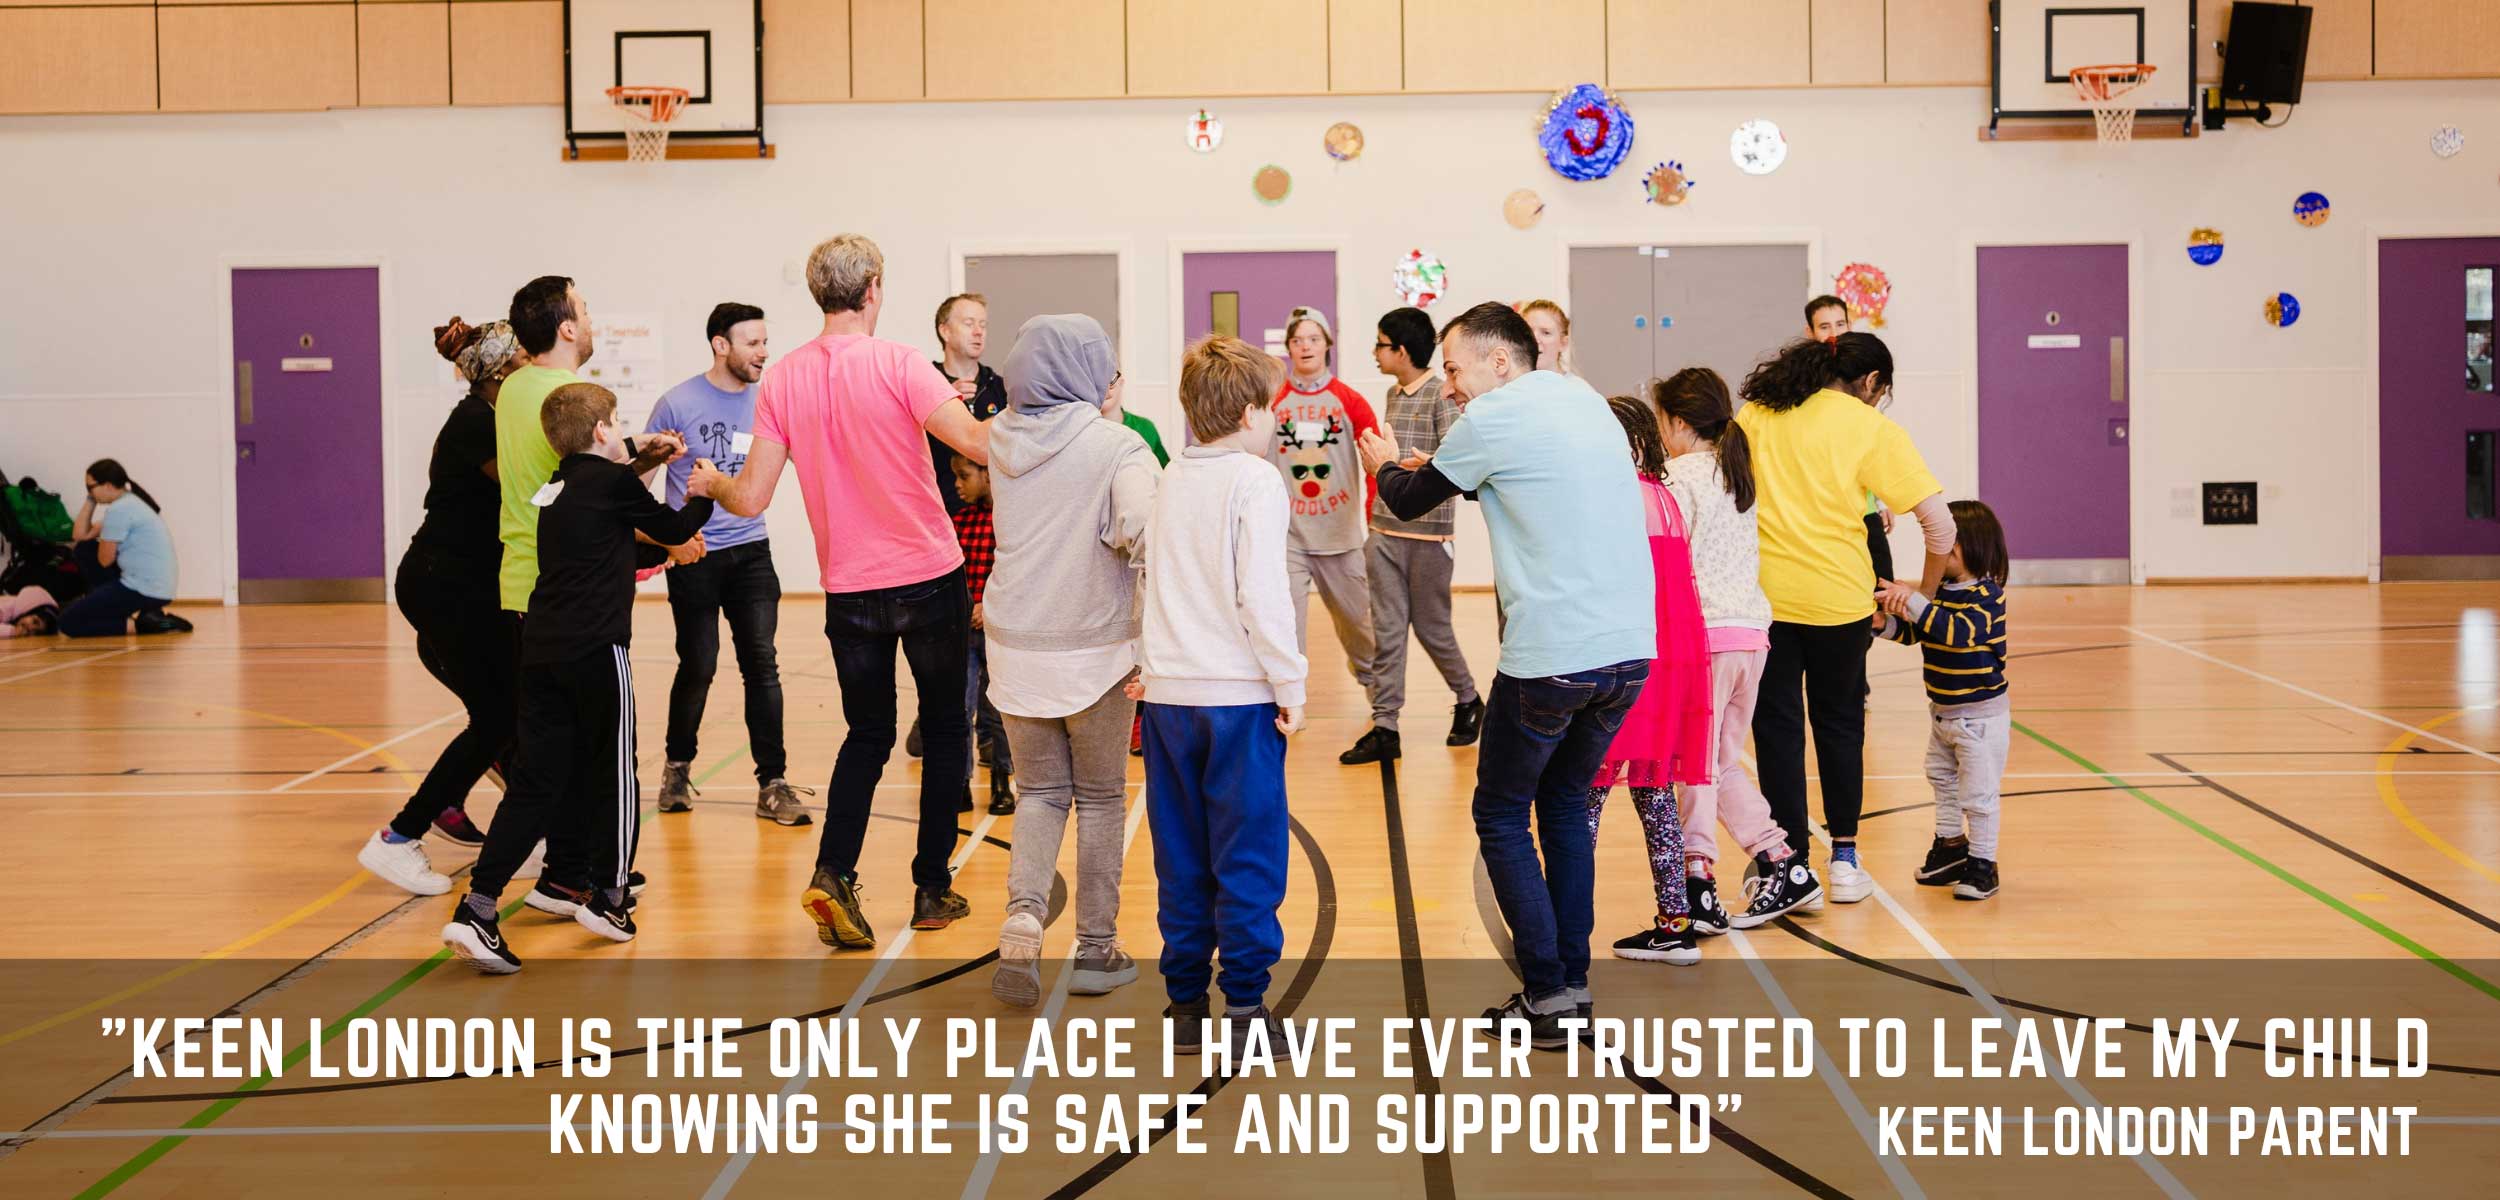 A supportive KEEN London volunteer assists a young girl in throwing a vibrant ball. 